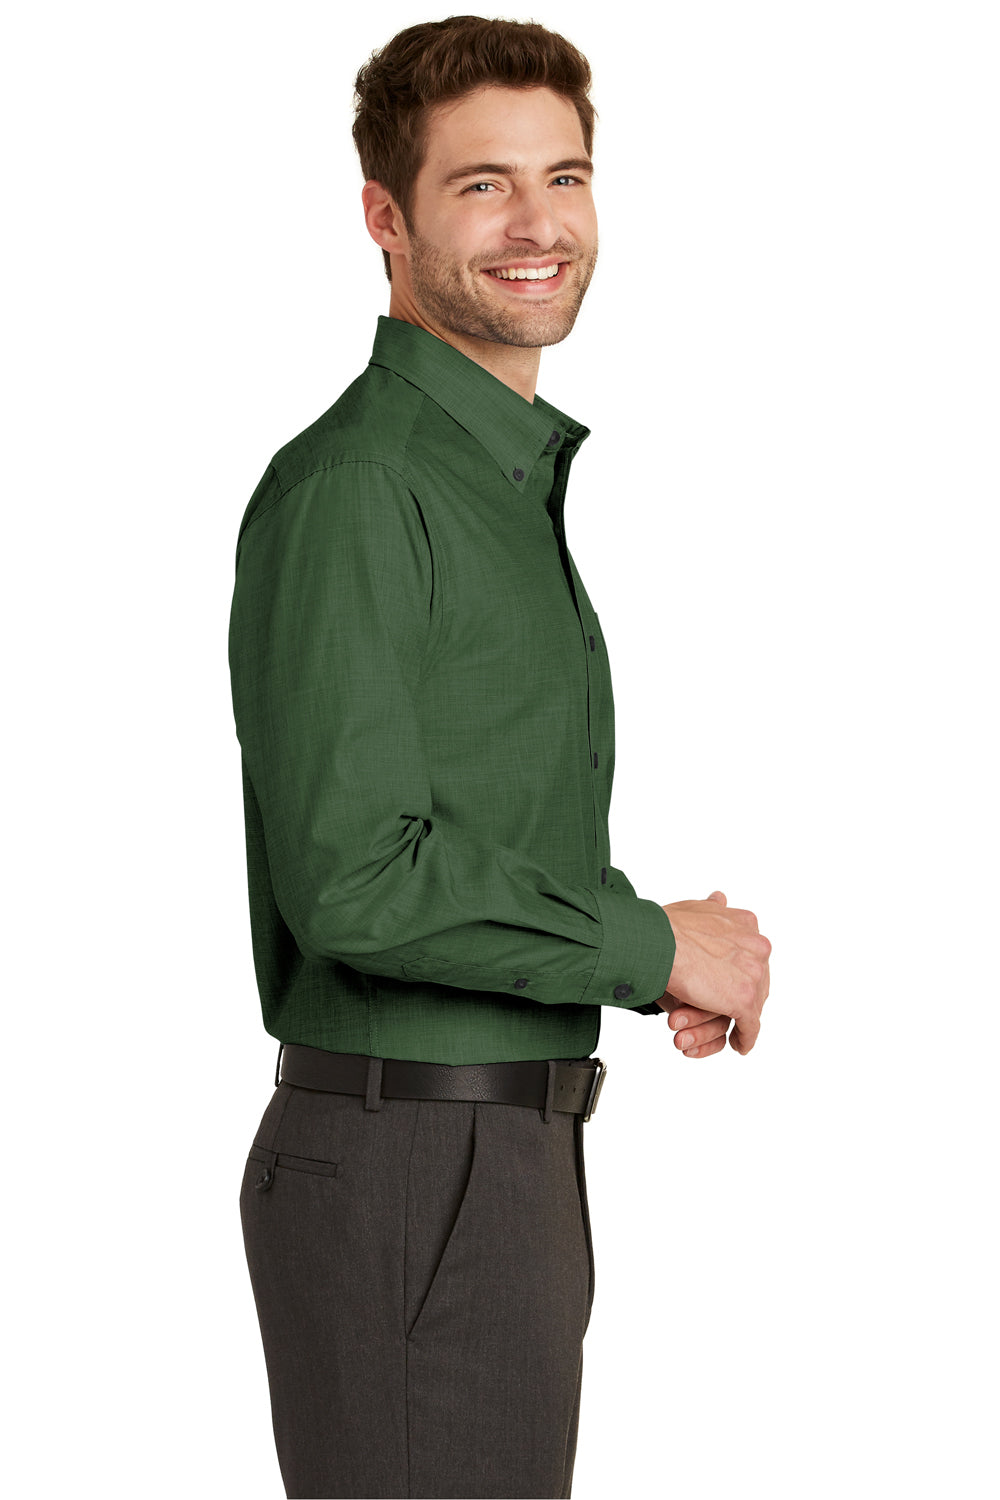 Port Authority S640 Mens Easy Care Wrinkle Resistant Long Sleeve Button Down Shirt w/ Pocket Dark Cactus Green Side